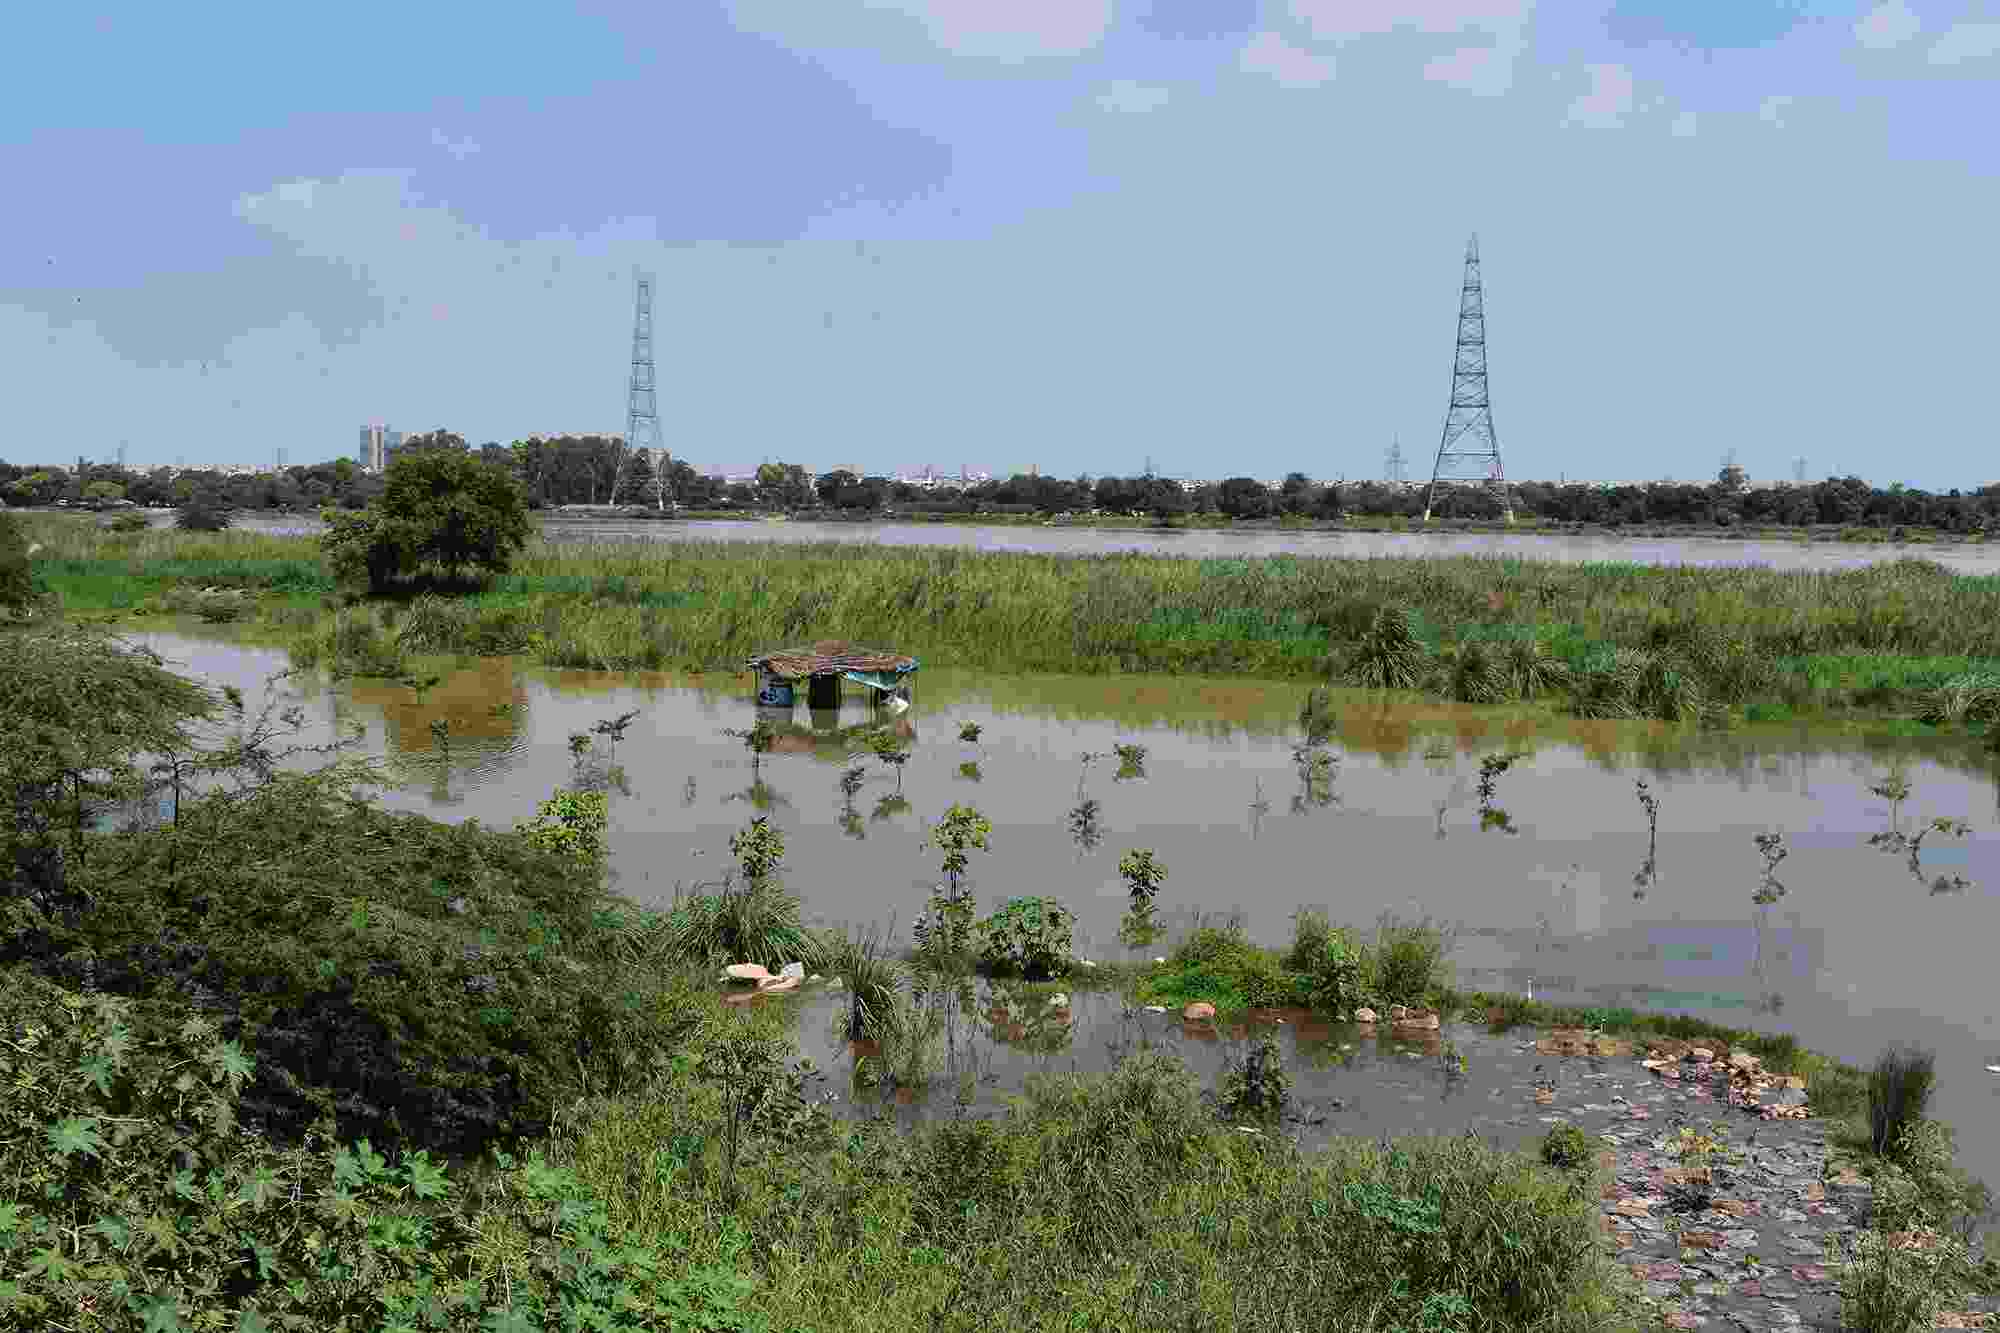 The flood plains of the Yamuna covered with water, with electricity pylons visible in the distance